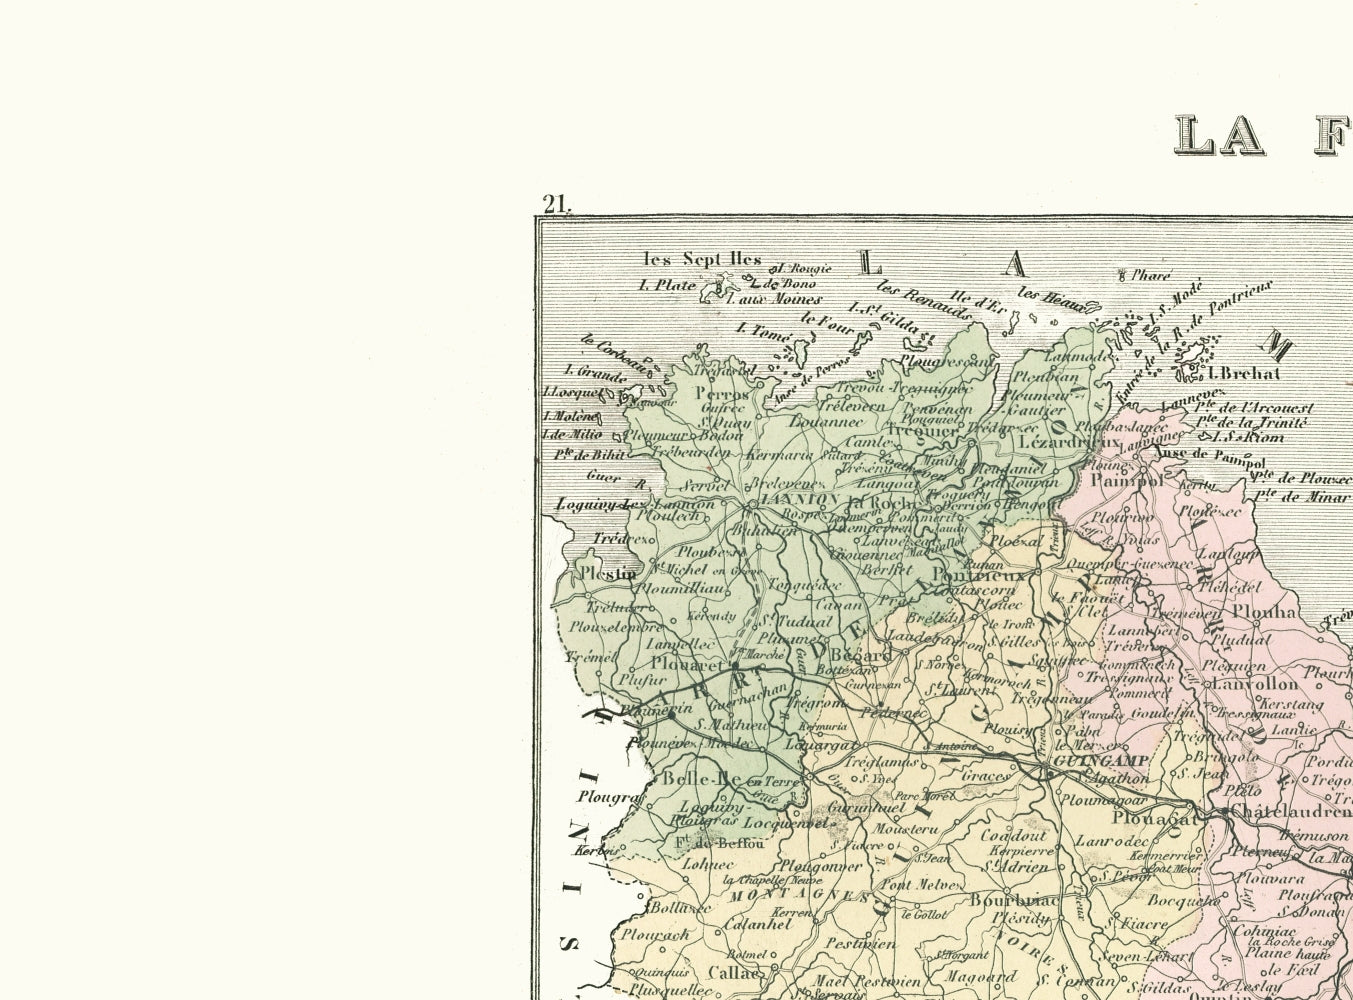 Historic Map - Cotes du Nord Department France - Migeon 1869 - 23 x 31.11 - Vintage Wall Art